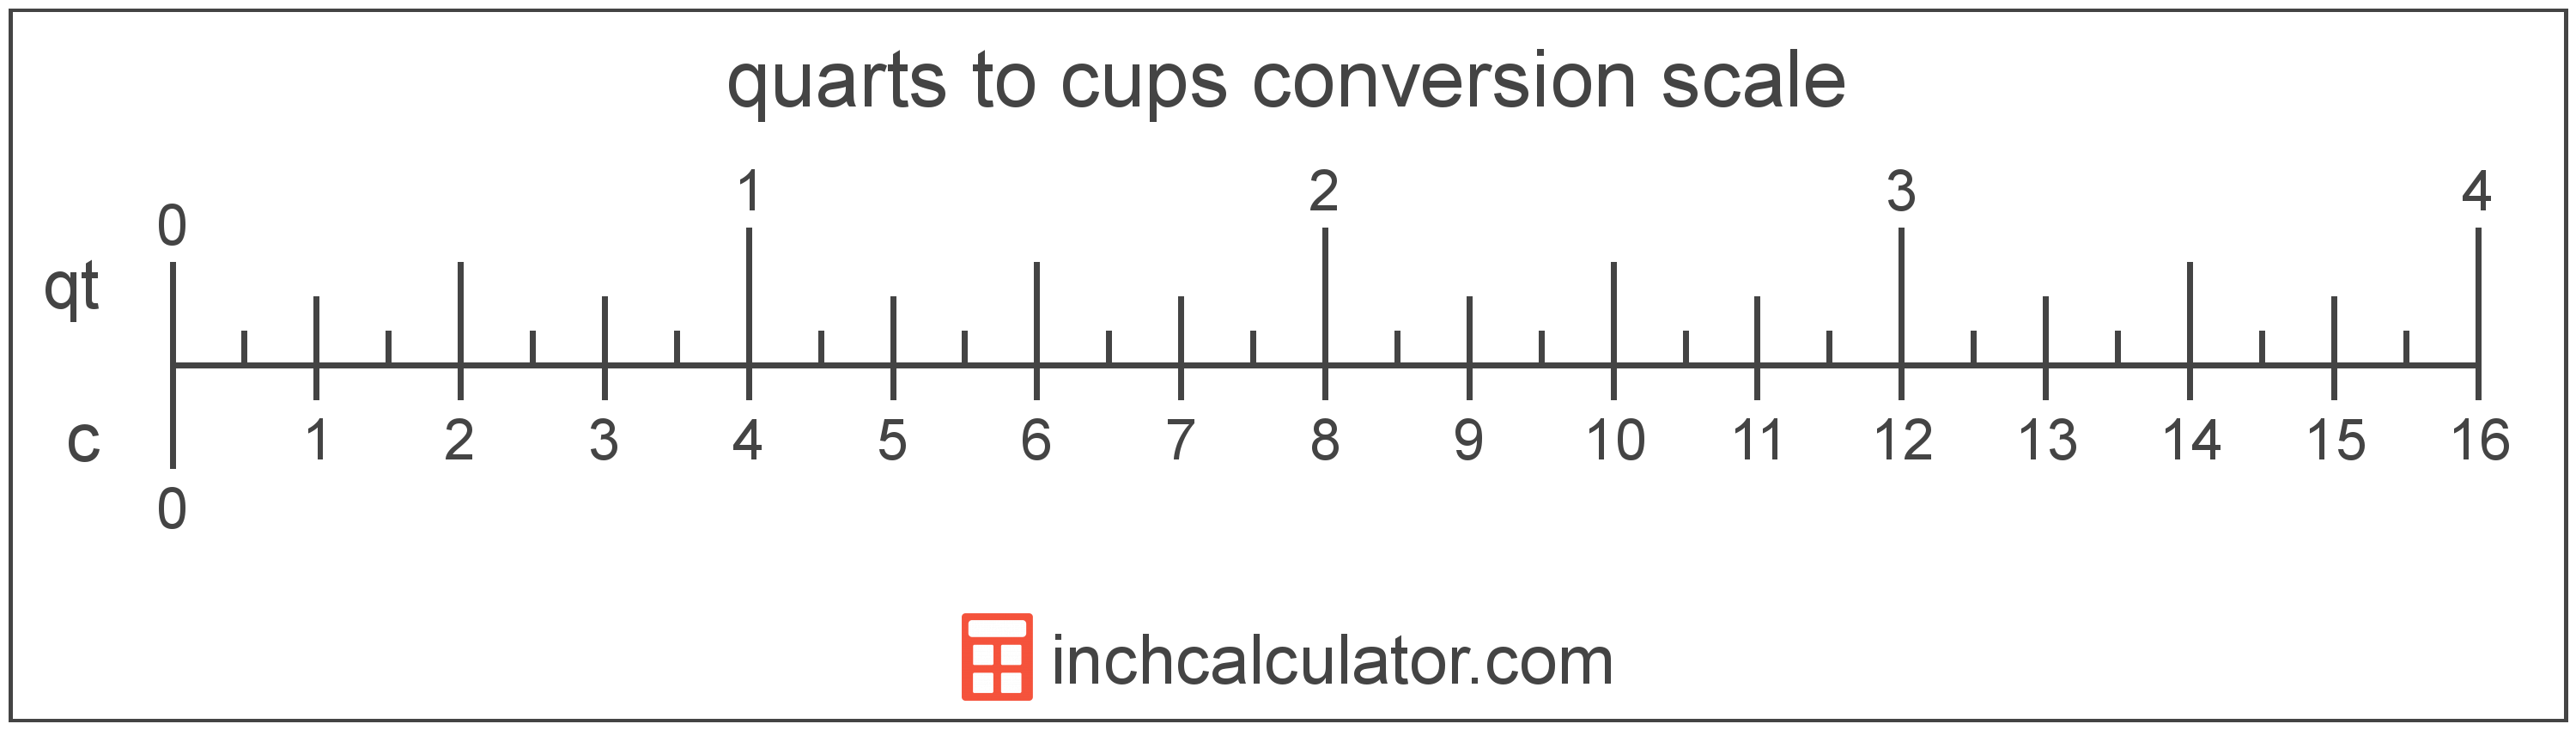 conversion scale showing cups and equivalent quarts volume values